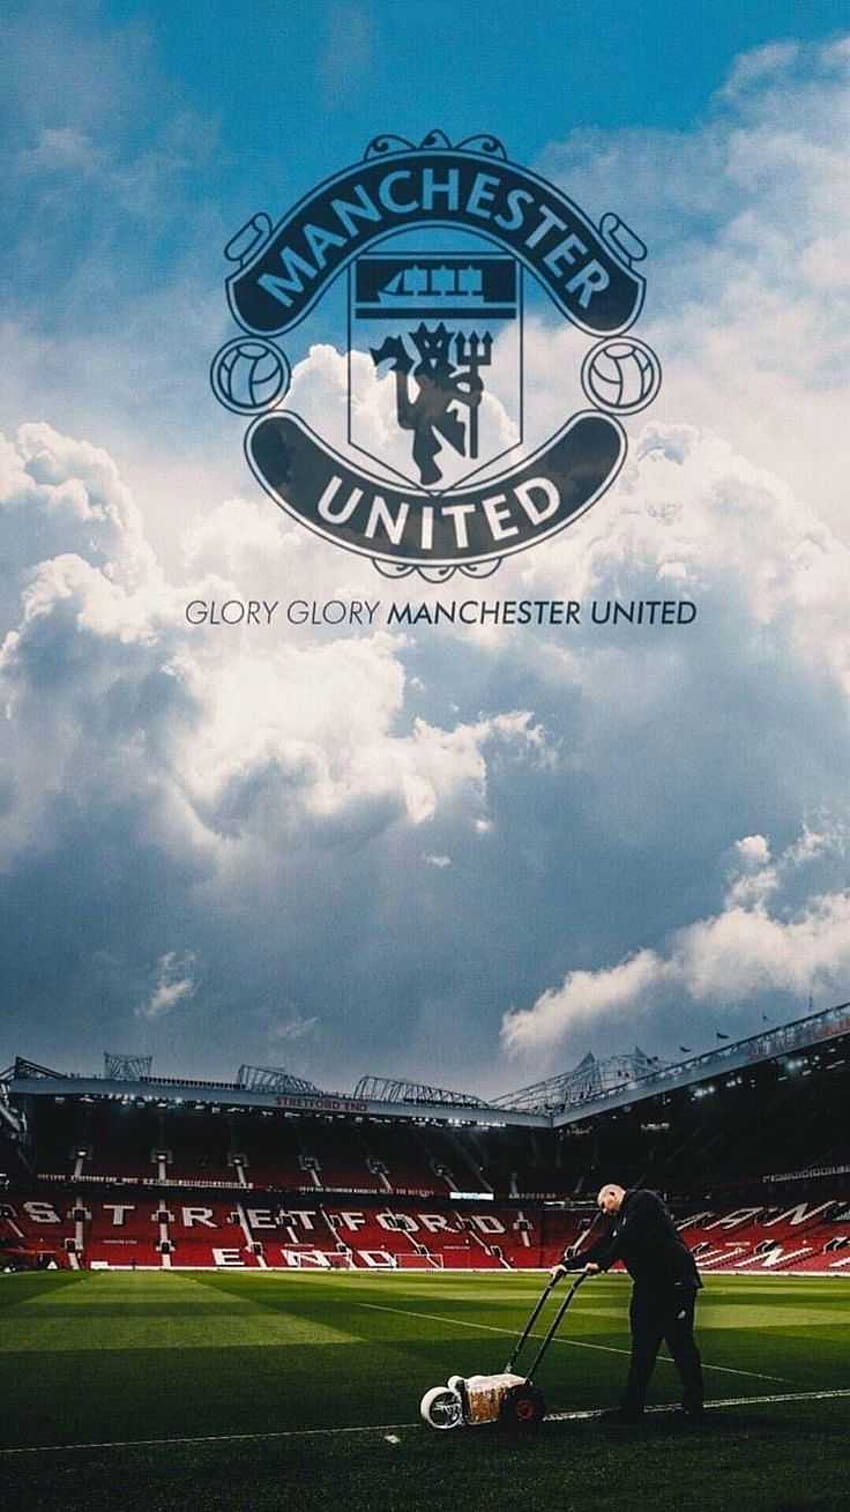 Phone Man Utd posted by John Thompson, manchester united iphone HD phone wallpaper